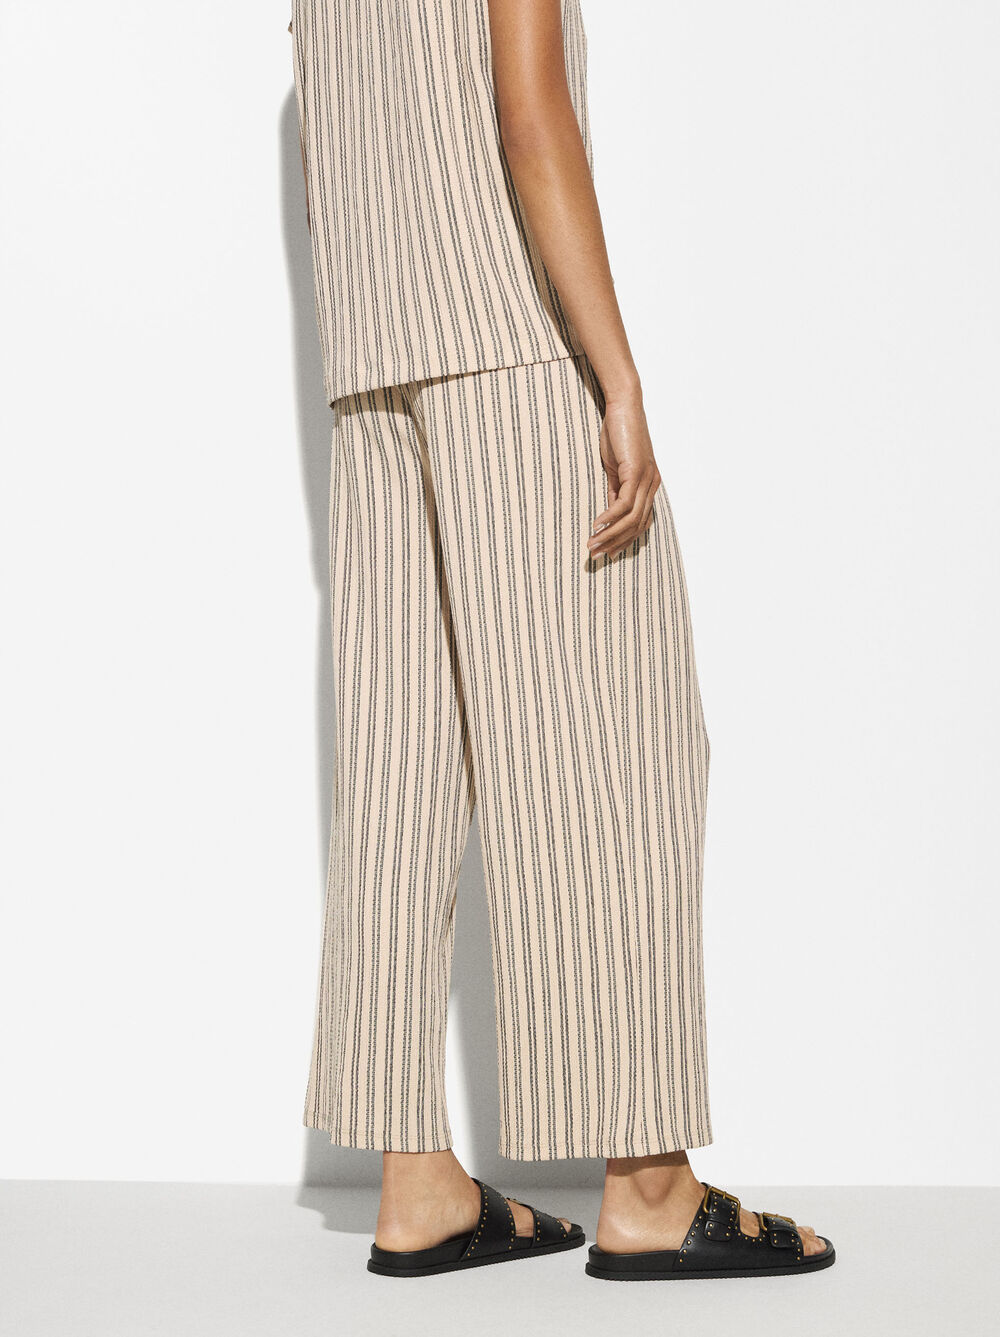 Textured Pants With Elastic Waistband image number 4.0